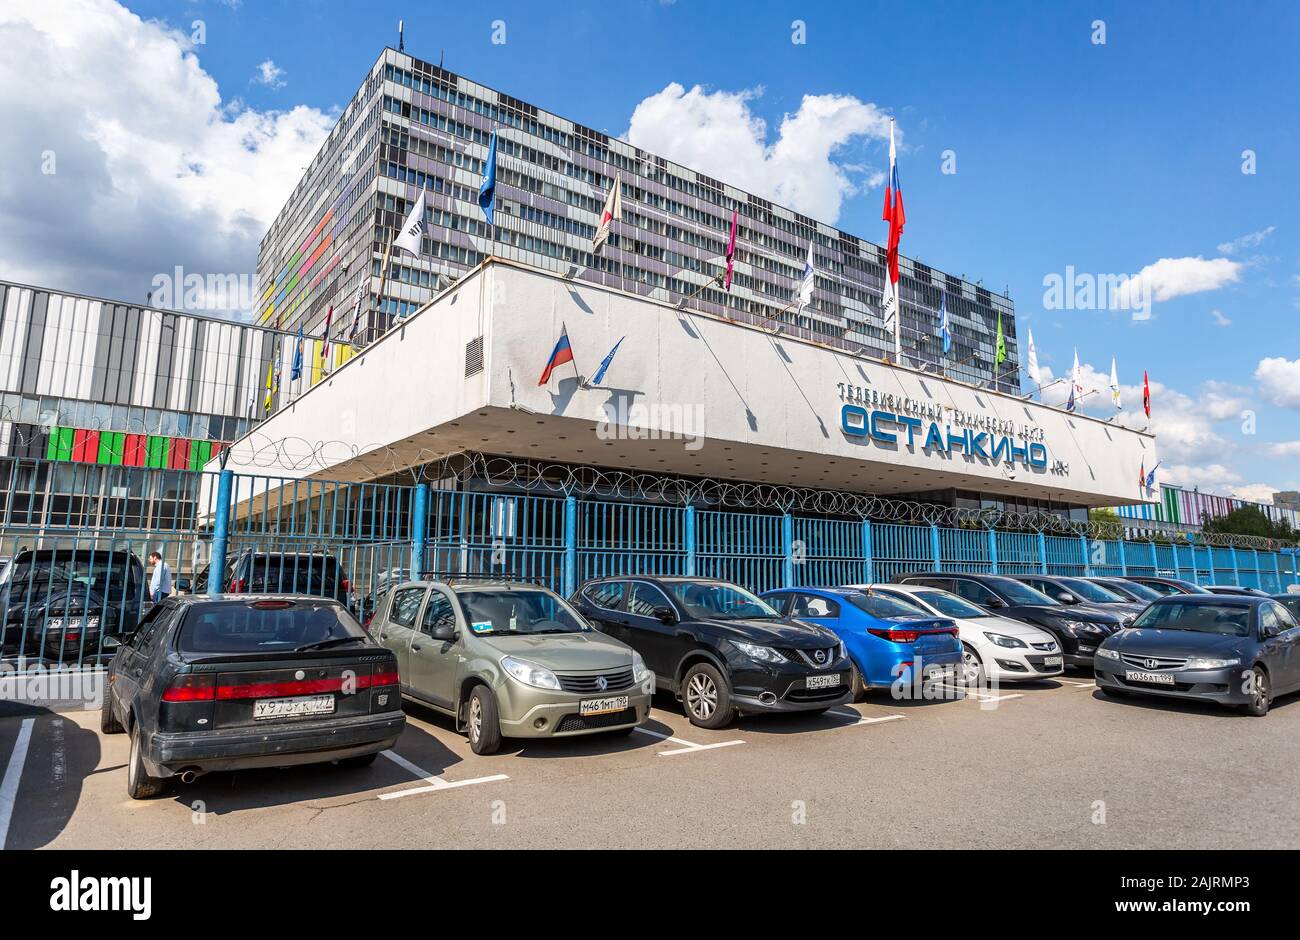 Moscow, Russia - July 8, 2019: Television Technical Center Ostankino in Moscow Stock Photo